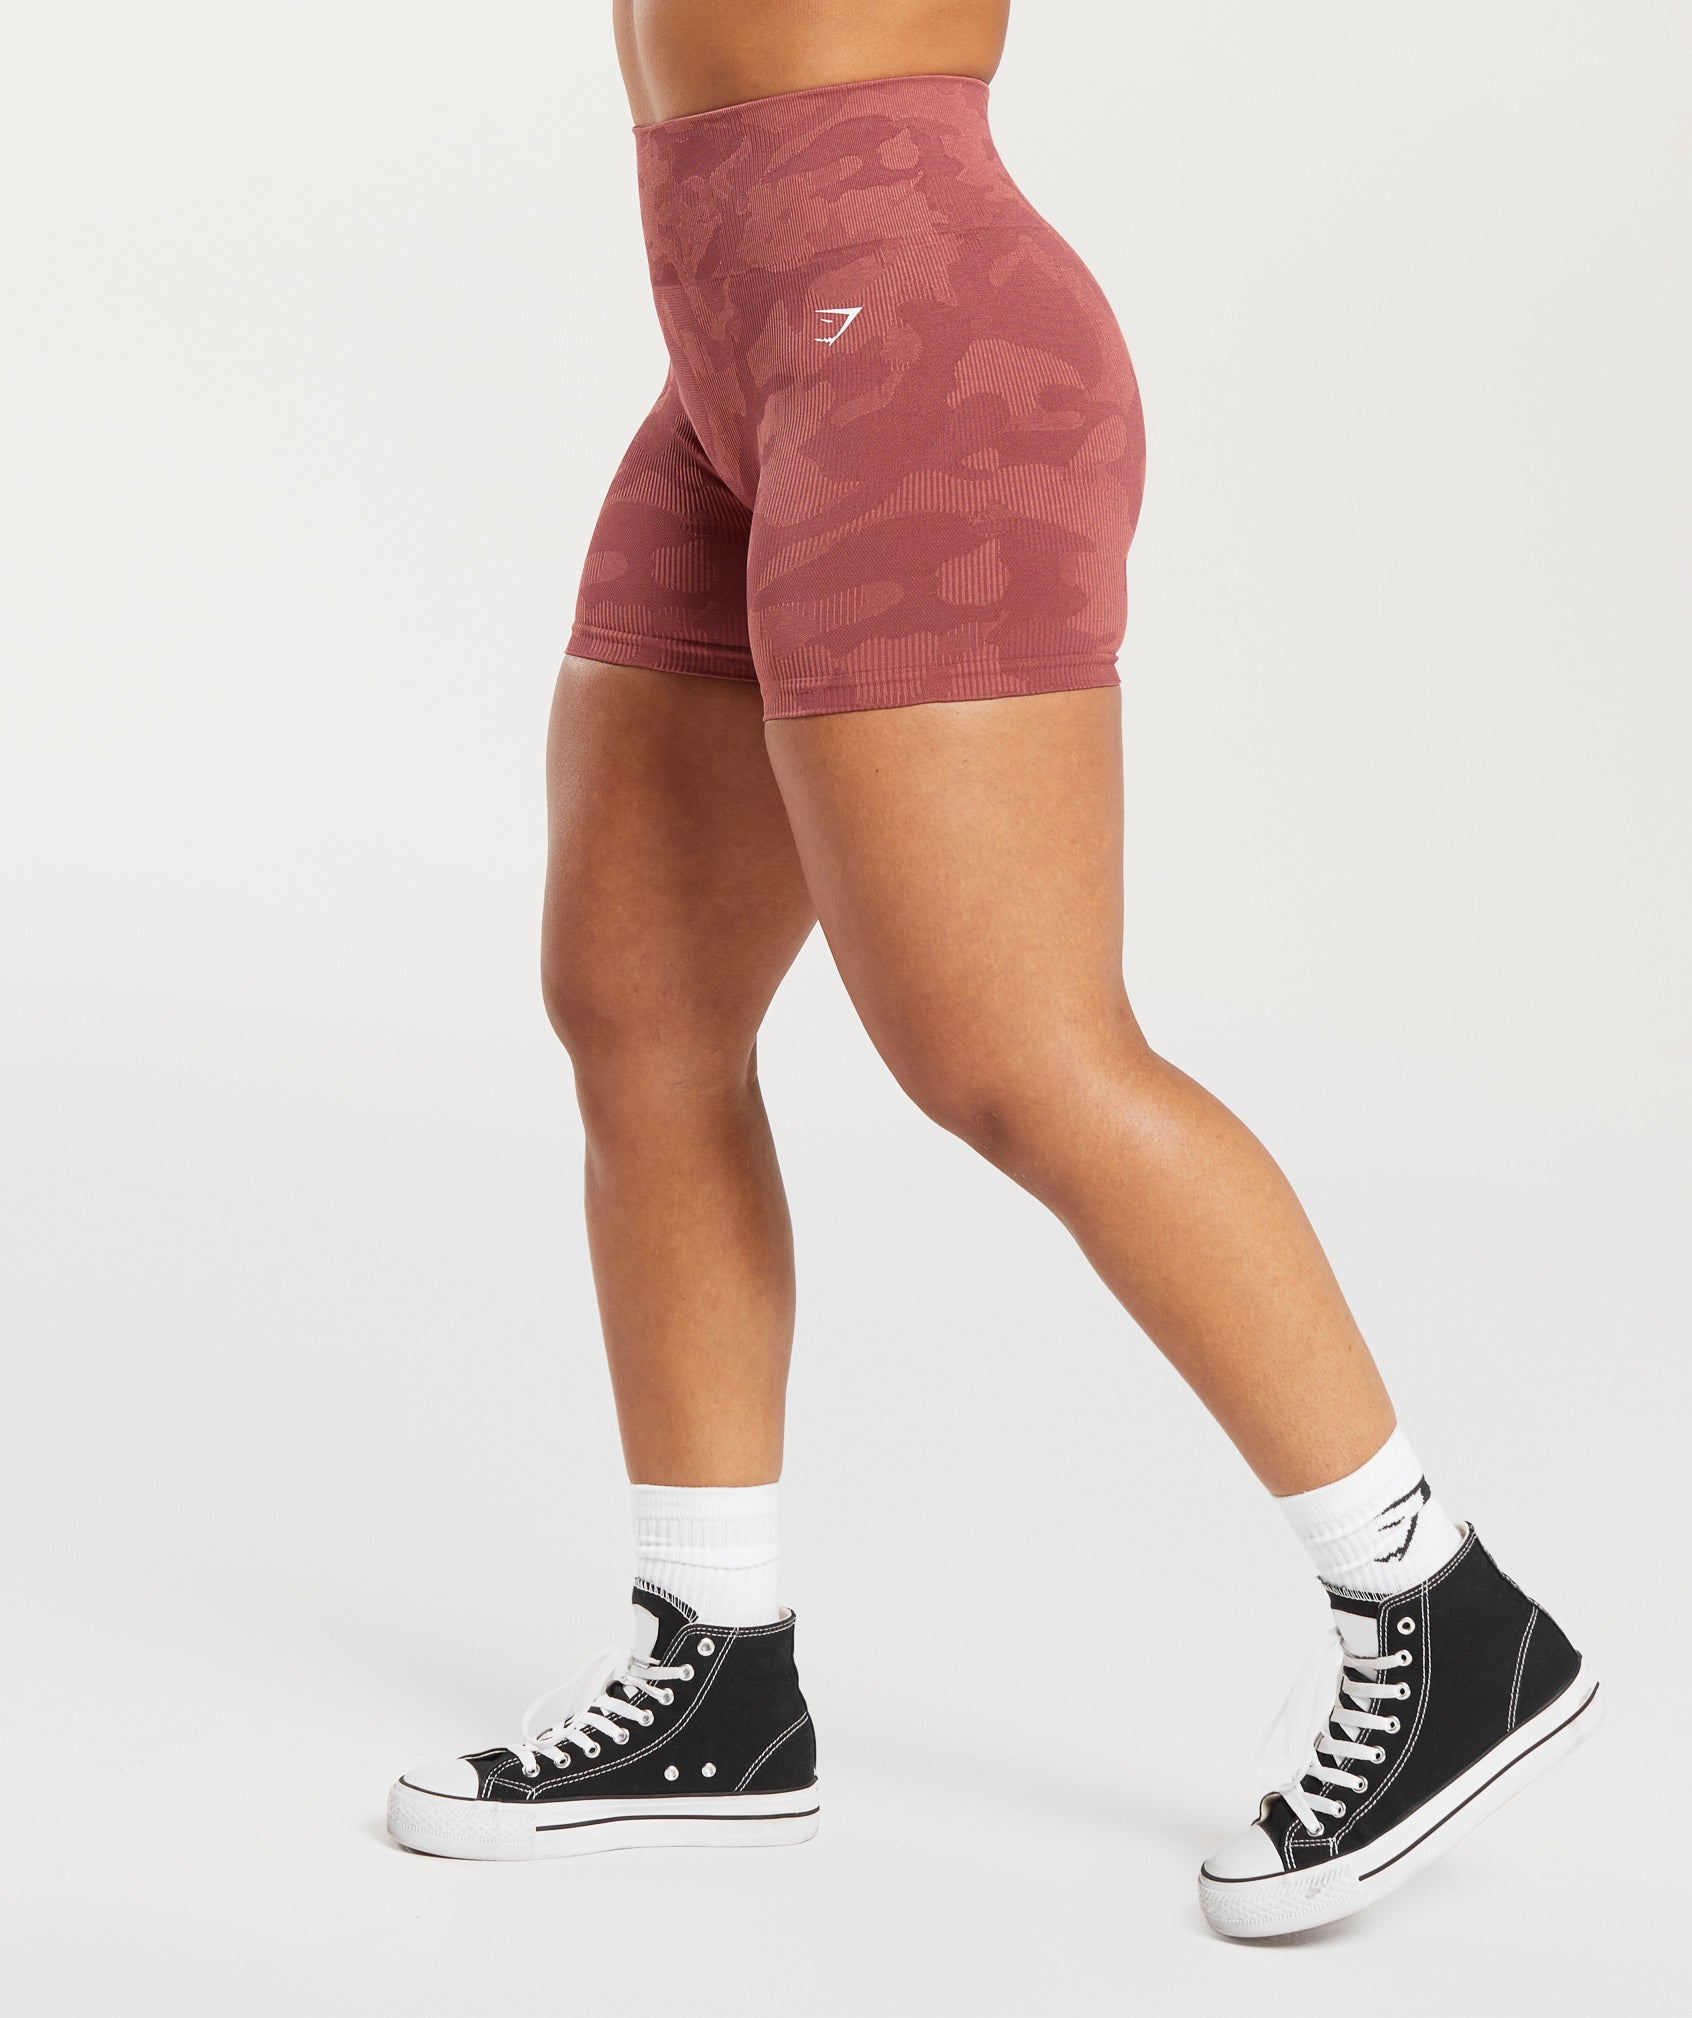 Adapt Camo Seamless Ribbed Shorts in Soft Berry/Sunbaked Pink - view 3